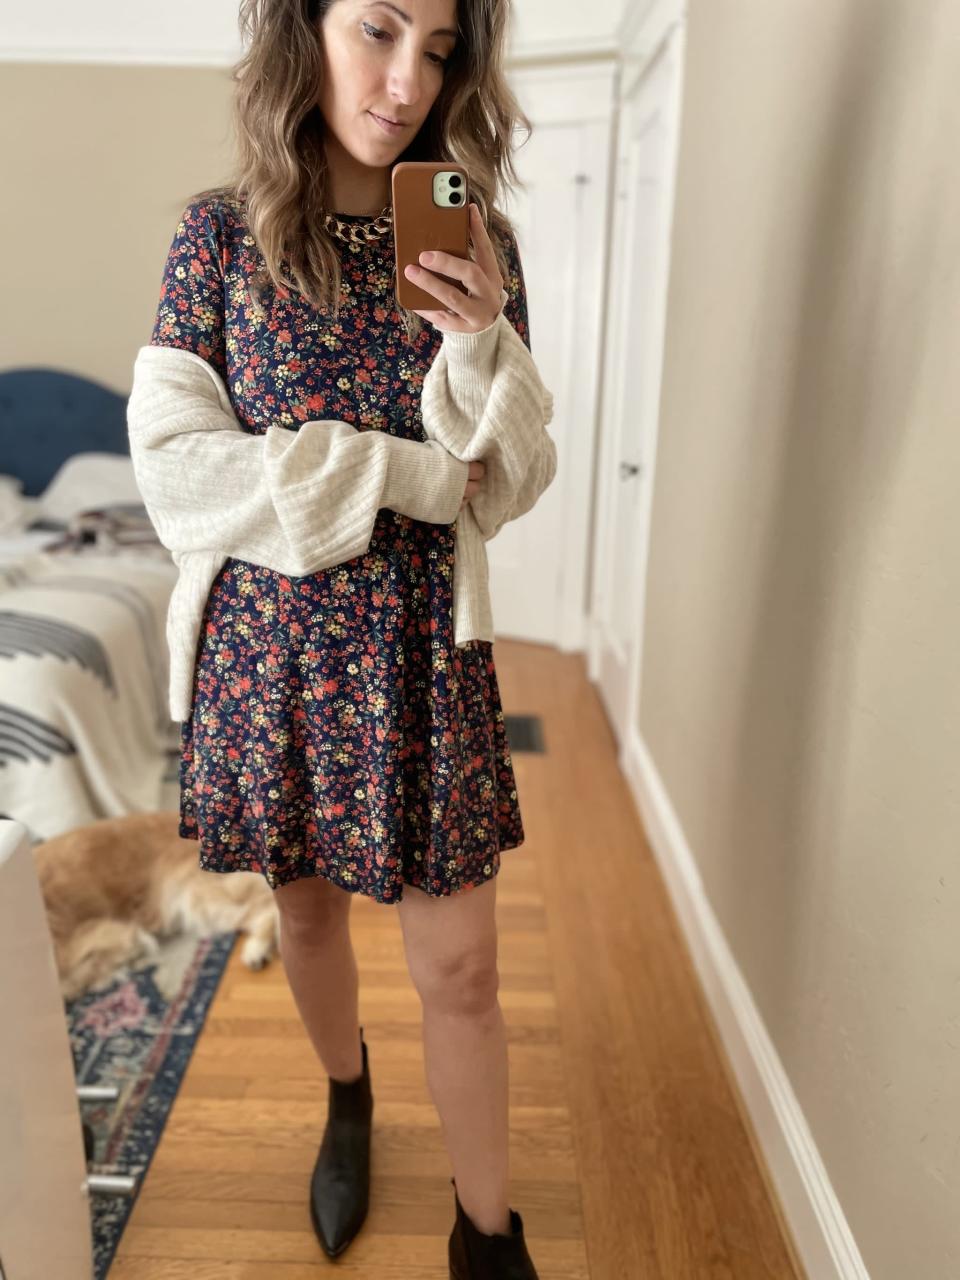 <p><strong>The item:</strong> Old Navy Floral-Print Jersey-Knit Swing Dress (Sold Out) </p> <p><strong>What our editor said:</strong> "It's flowy and flattering, which makes it easy to toss on. It feels more like a long-sleeved shirt than anything, and it just moves so nicely. I wore it with a cream-colored cardigan sweater and black ankle boots, but to head outside I can easily toss on leggings to make it warmer." - RB </p> <p>If you want to read more, here is the <a href="https://www.popsugar.com/fashion/long-sleeve-floral-dress-at-old-navy-editor-review-48056334" class="link " rel="nofollow noopener" target="_blank" data-ylk="slk:complete review">complete review</a>.<br></p>